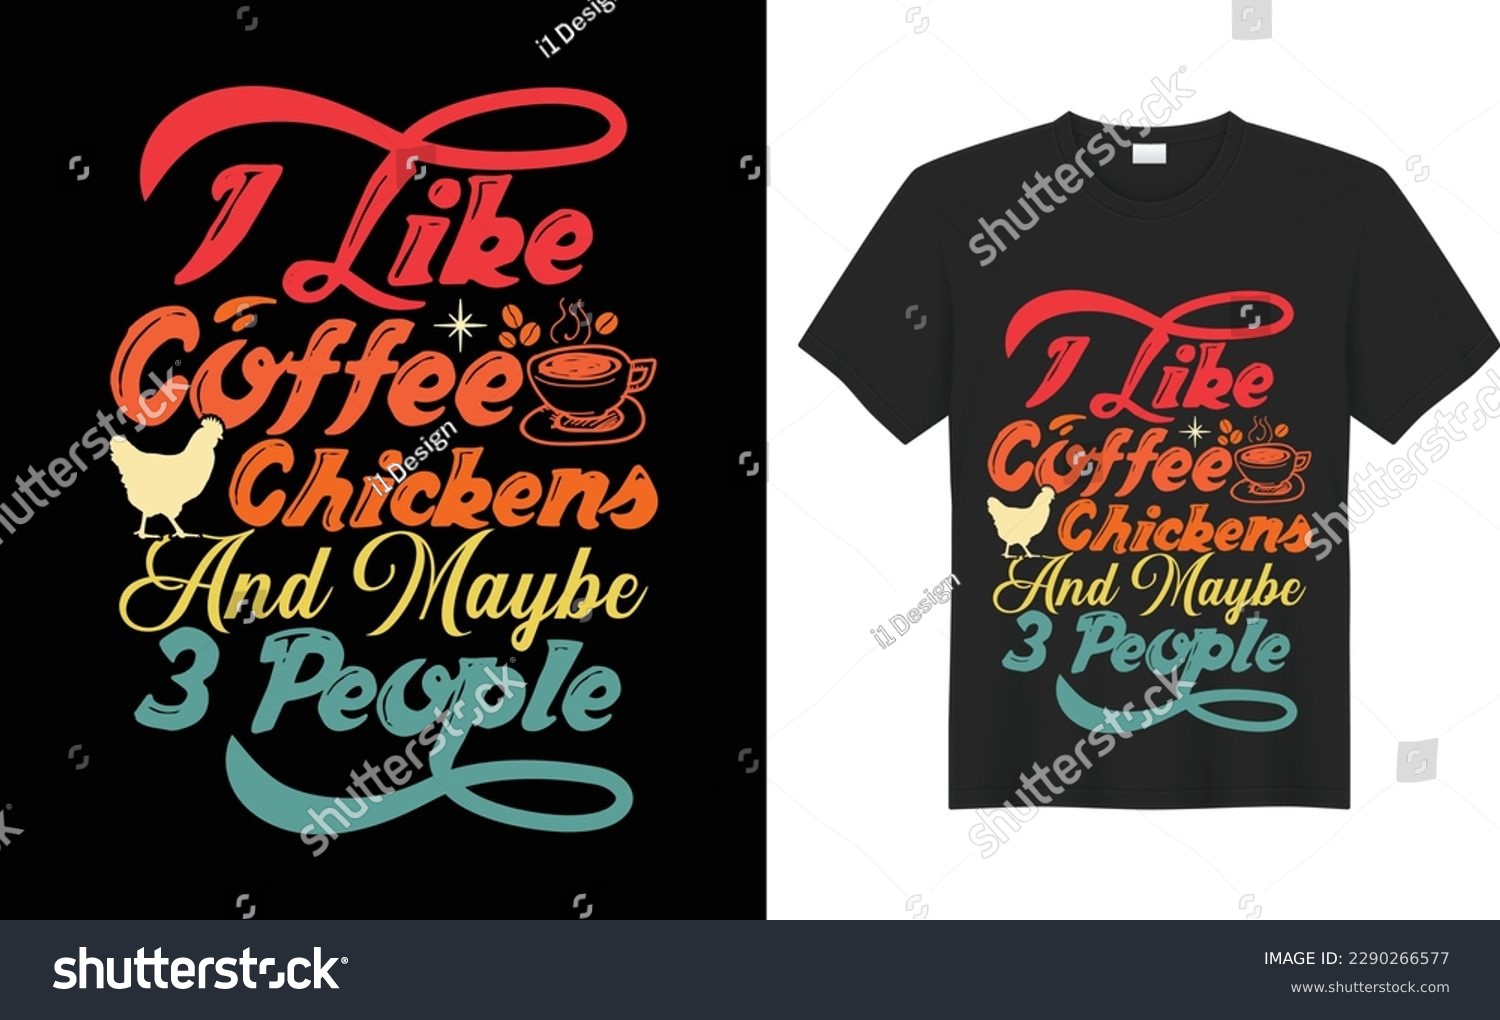 SVG of I Like Coffee Chickens and Maybe 3 People SVG Typography Colorful T-shirt Design Vector Template. Hand Lettering Illustration And Printing for T-shirt, Banner, Poster, Flyers, Etc. svg